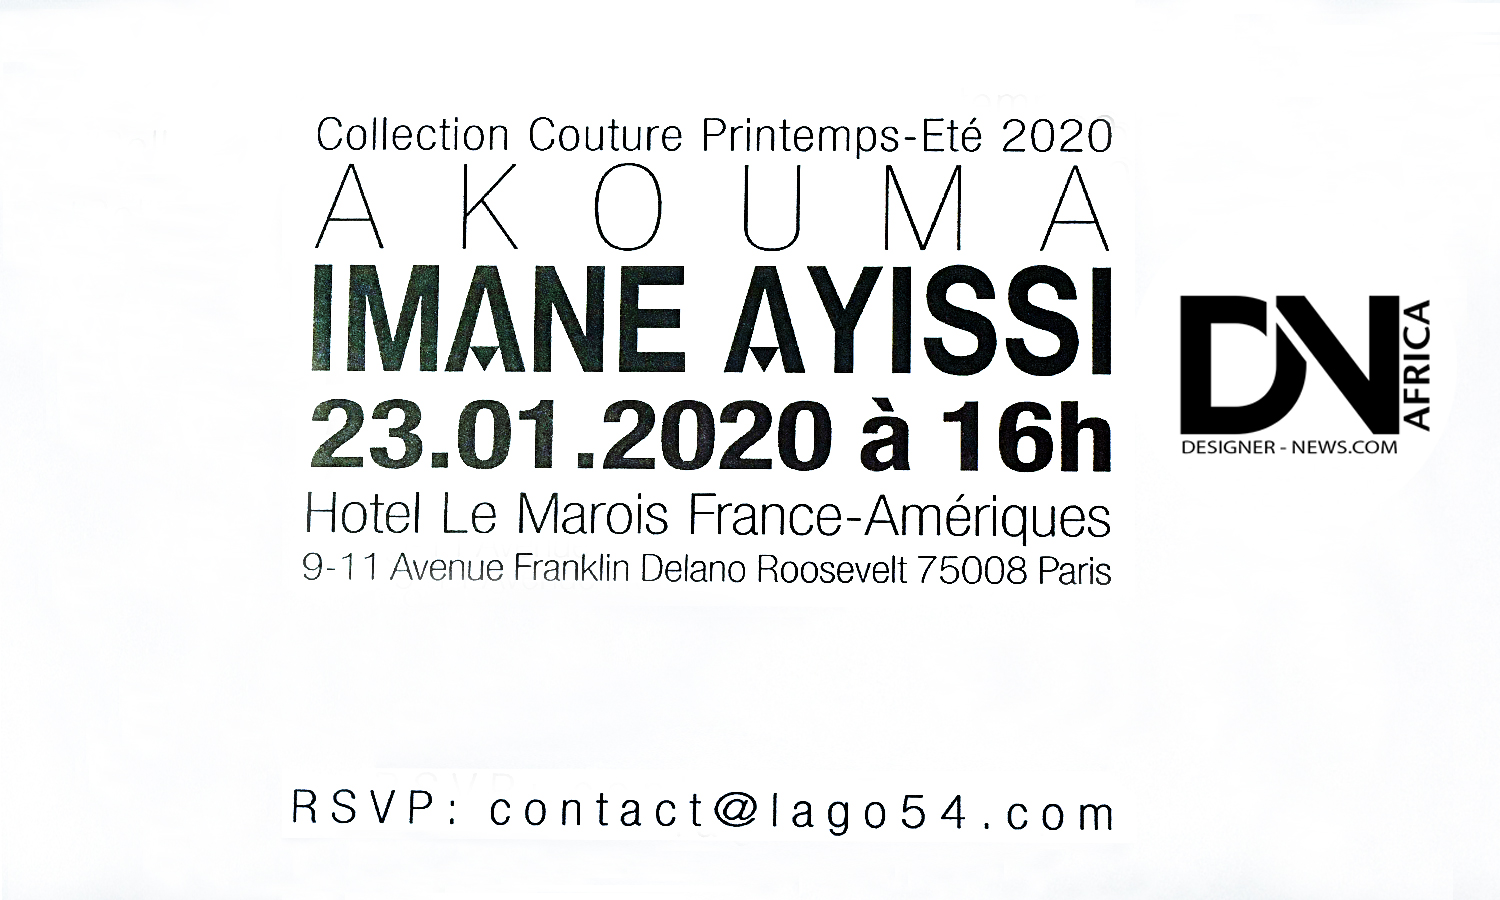 AFRICAN FASHION STYLE MAGAZINE - Imane-Ayissi-Couture-Spring-2020 - Collection Akouma - PR Lago 54 - Location Hotel Le Marois - Photographer DAN NGU - Media Partner DN AFRICA - STUDIO 24 NIGERIA - STUDIO 24 INTERNATIONAL - Ifeanyi Christopher Oputa MD AND CEO OF COLVI LIMITED AND STUDIO 24 - CHEVEUX CHERIE and CHEVEUX CHERIE STUDIO BY MARIEME DUBOZ- Fashion Editor Nahomie NOOR COULIBALY